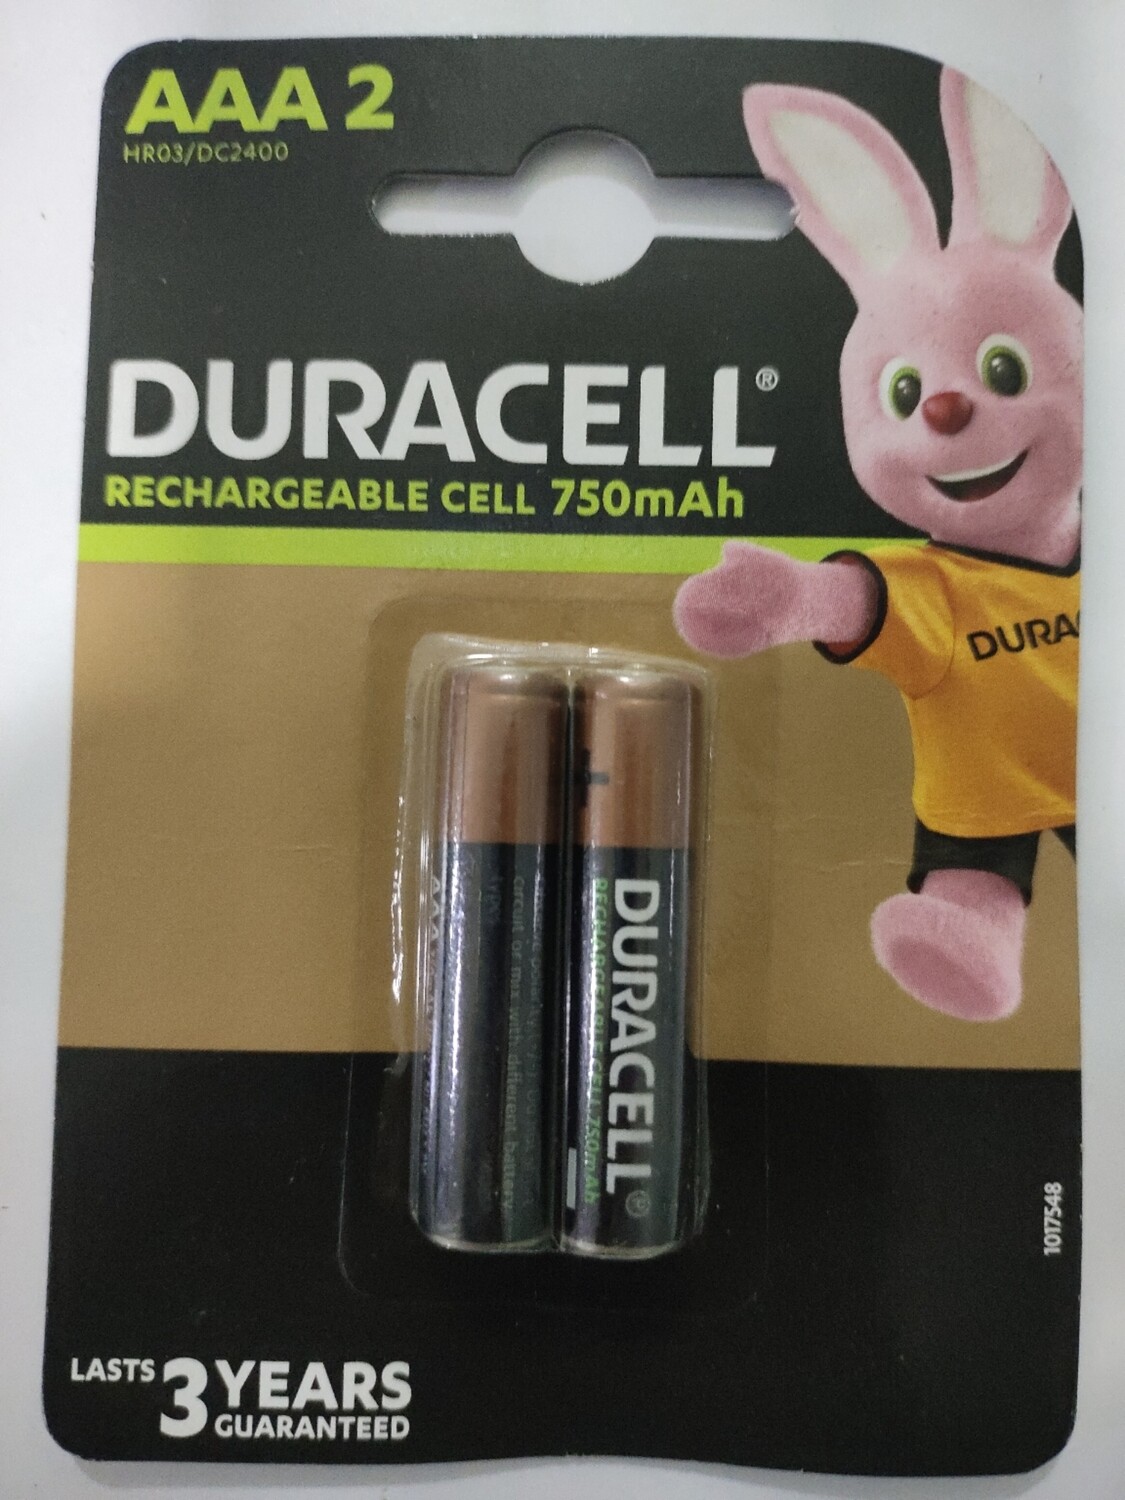 Duracell AAA,2 Battery,750mAh,Rechargeable Plus- Rs.230 – LT Online Store